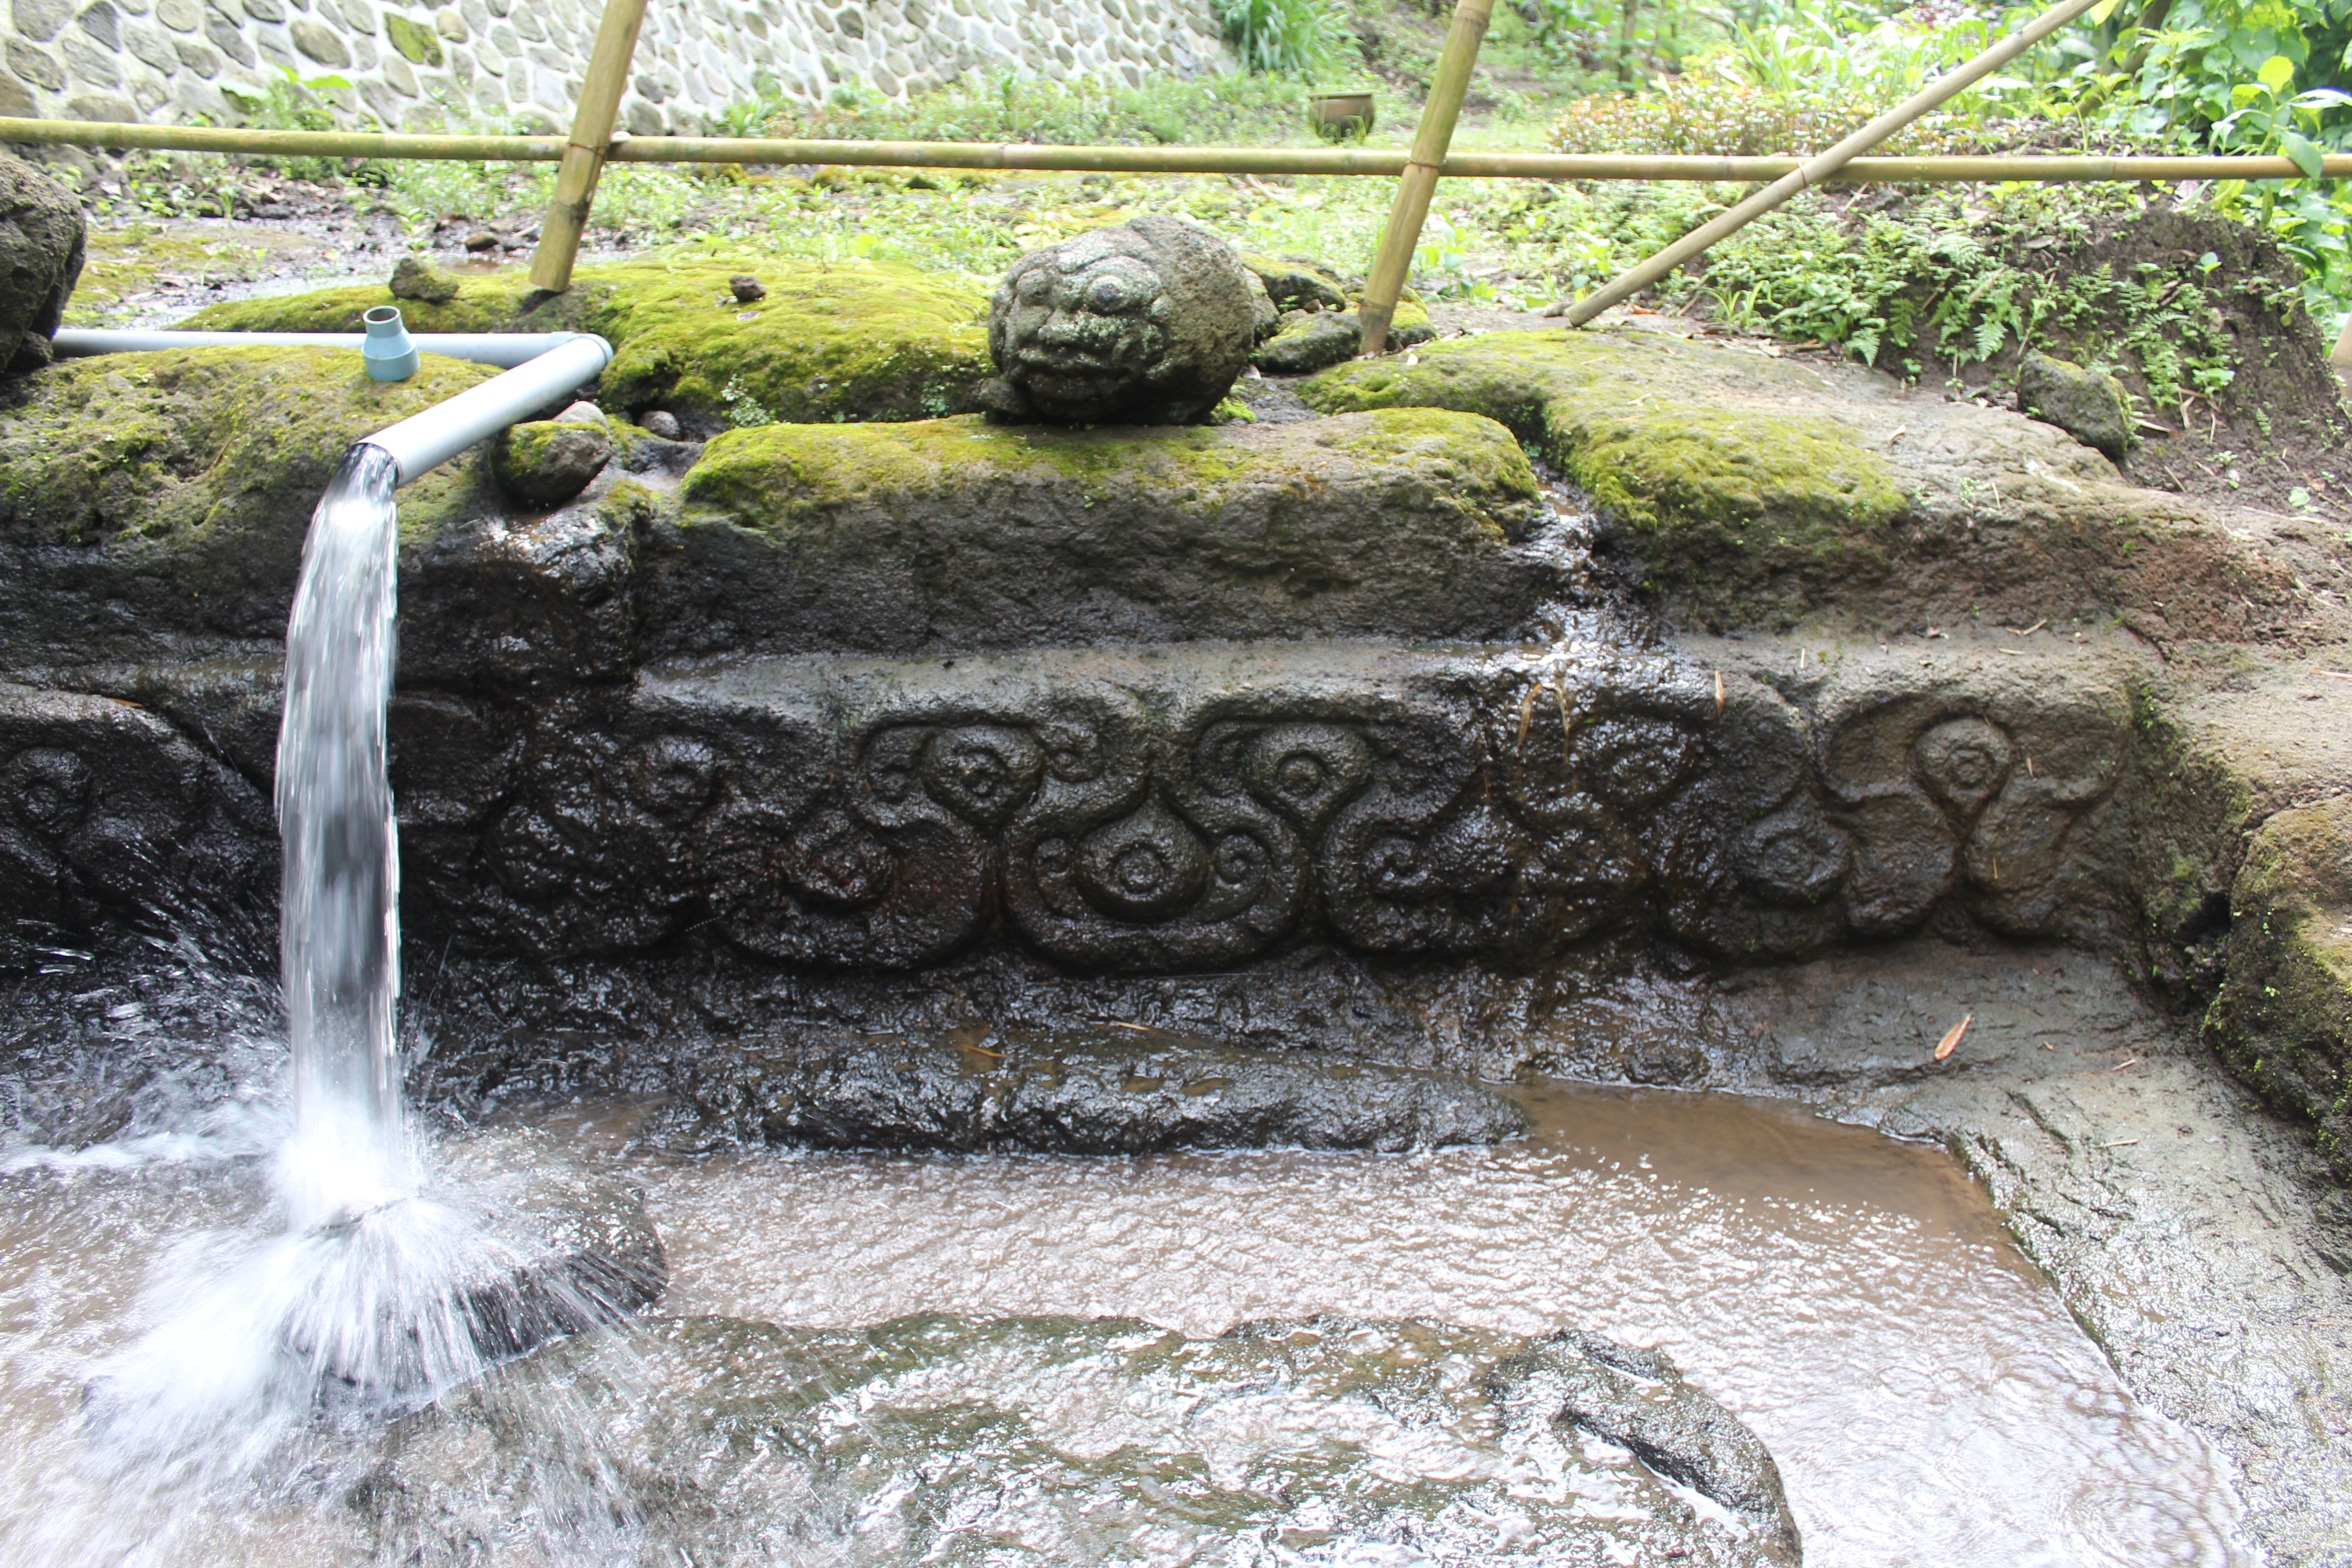 Water pouring into bathing pool, with rakshasa head and carved ornament